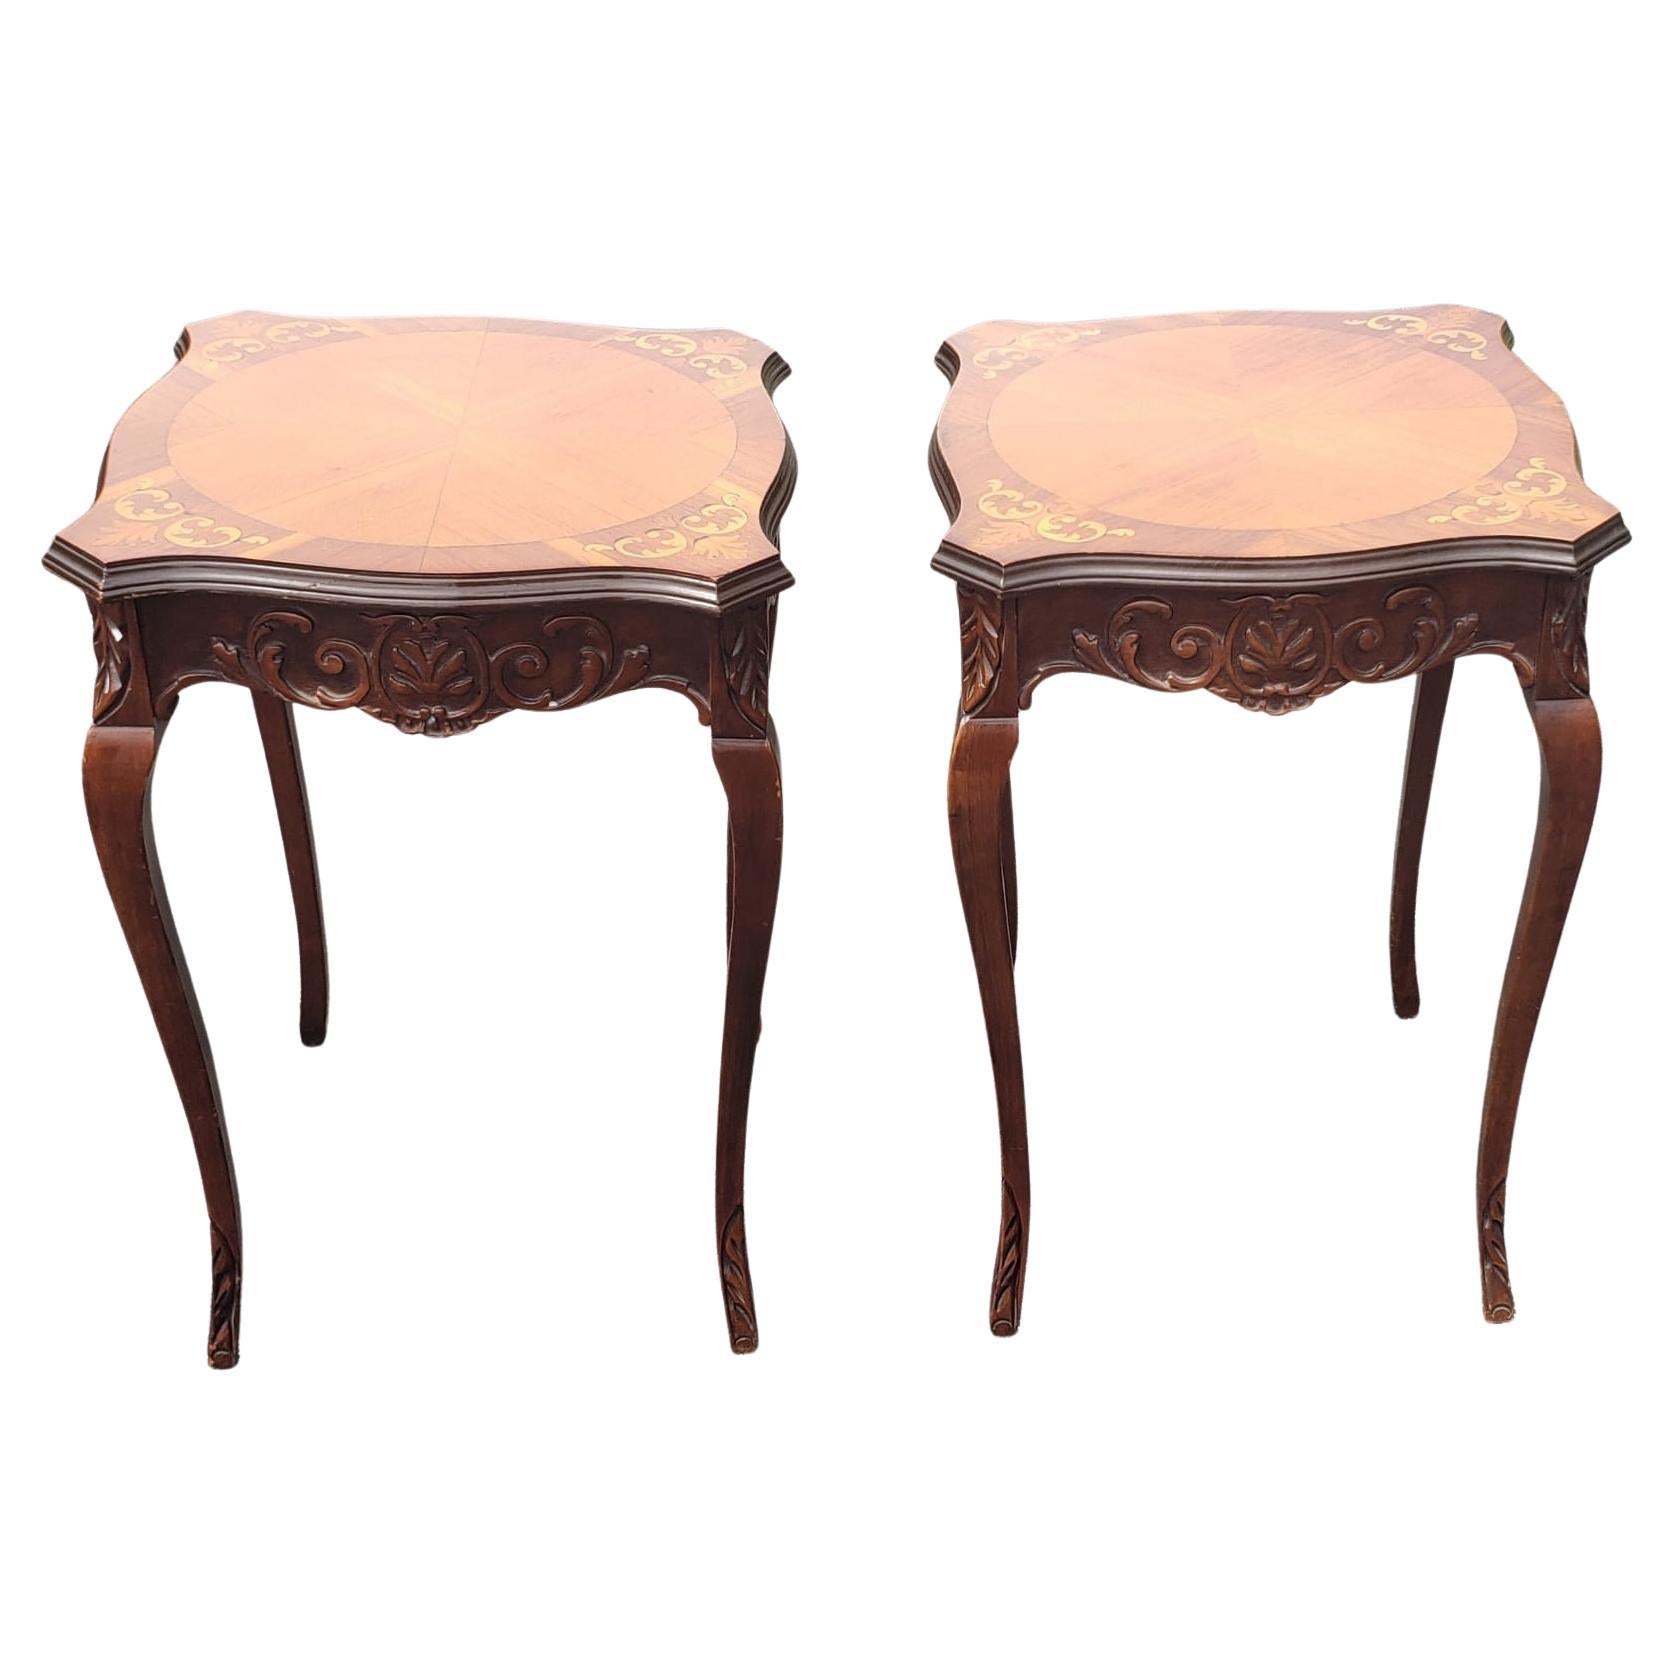 20th Century Pair of Mid-Century French Empire Style Carved Walnut and Marquetry Side Tables For Sale